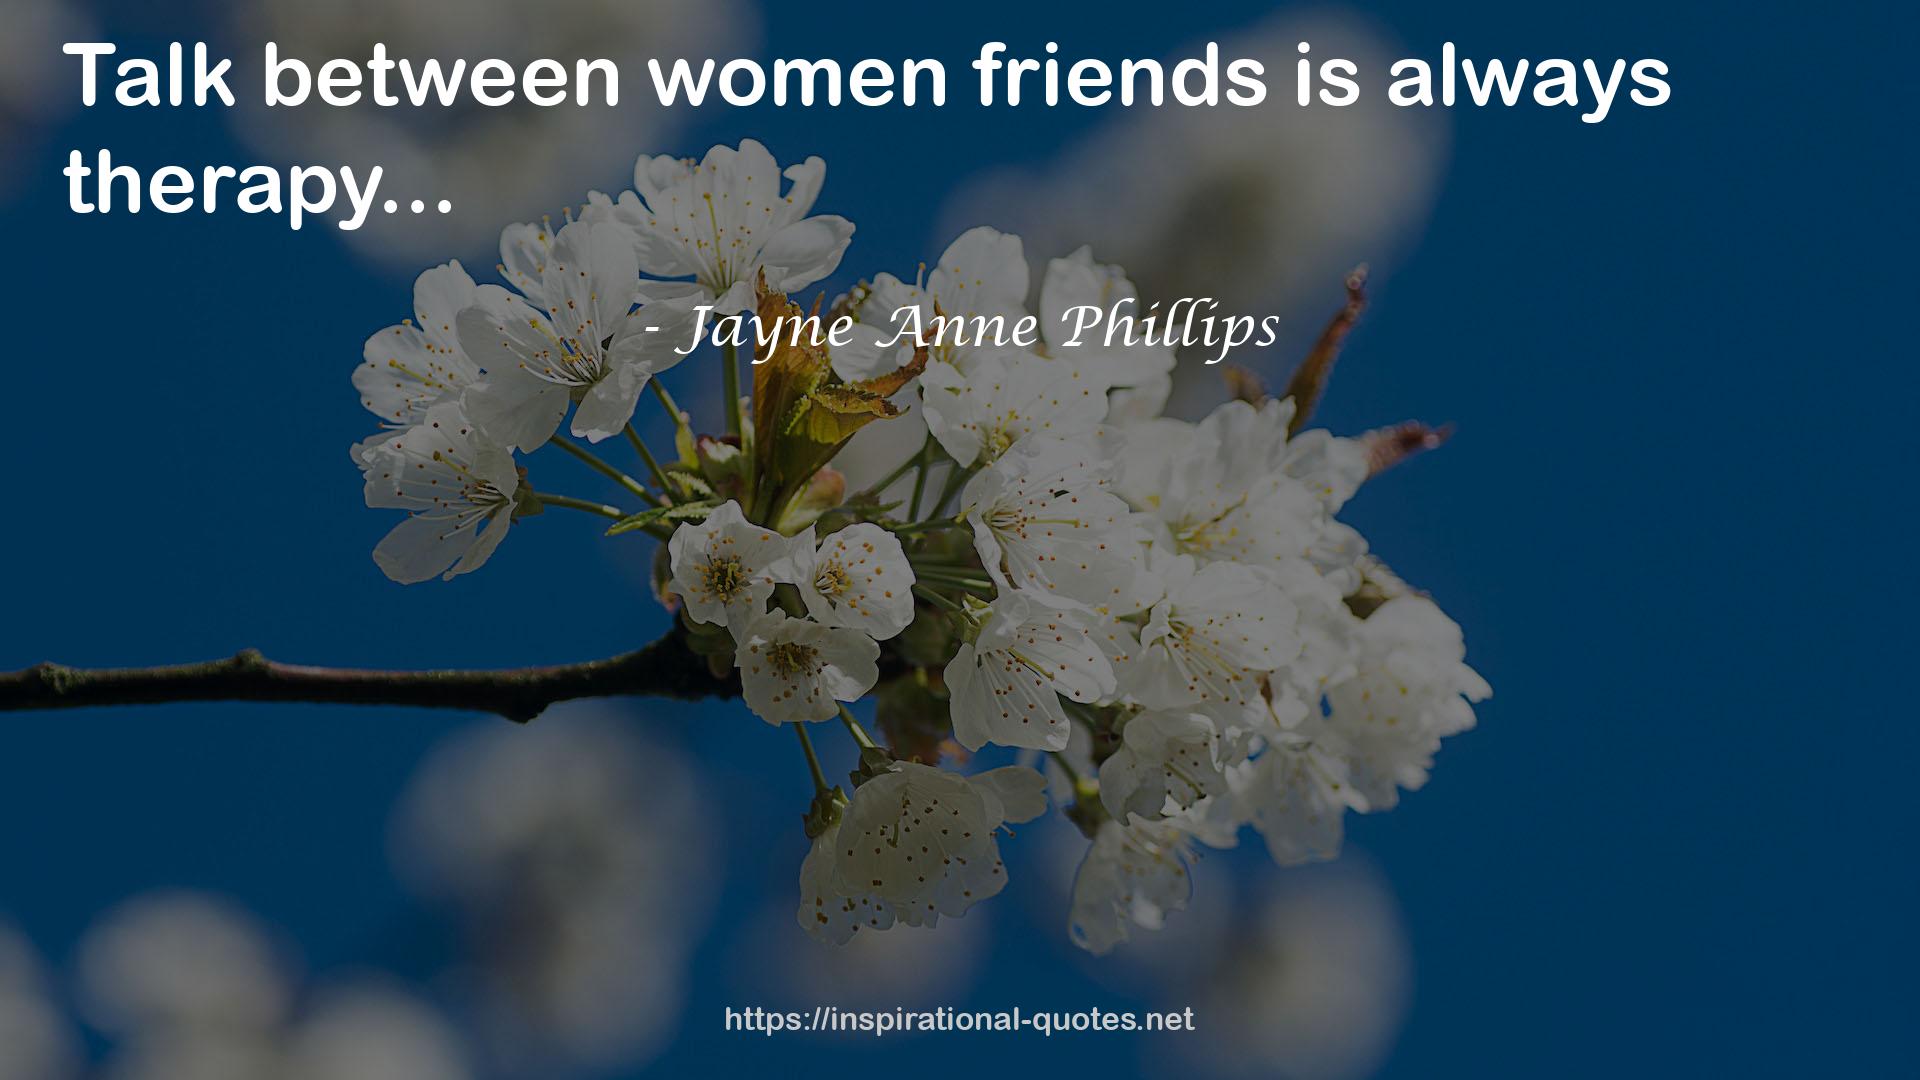 Jayne Anne Phillips QUOTES